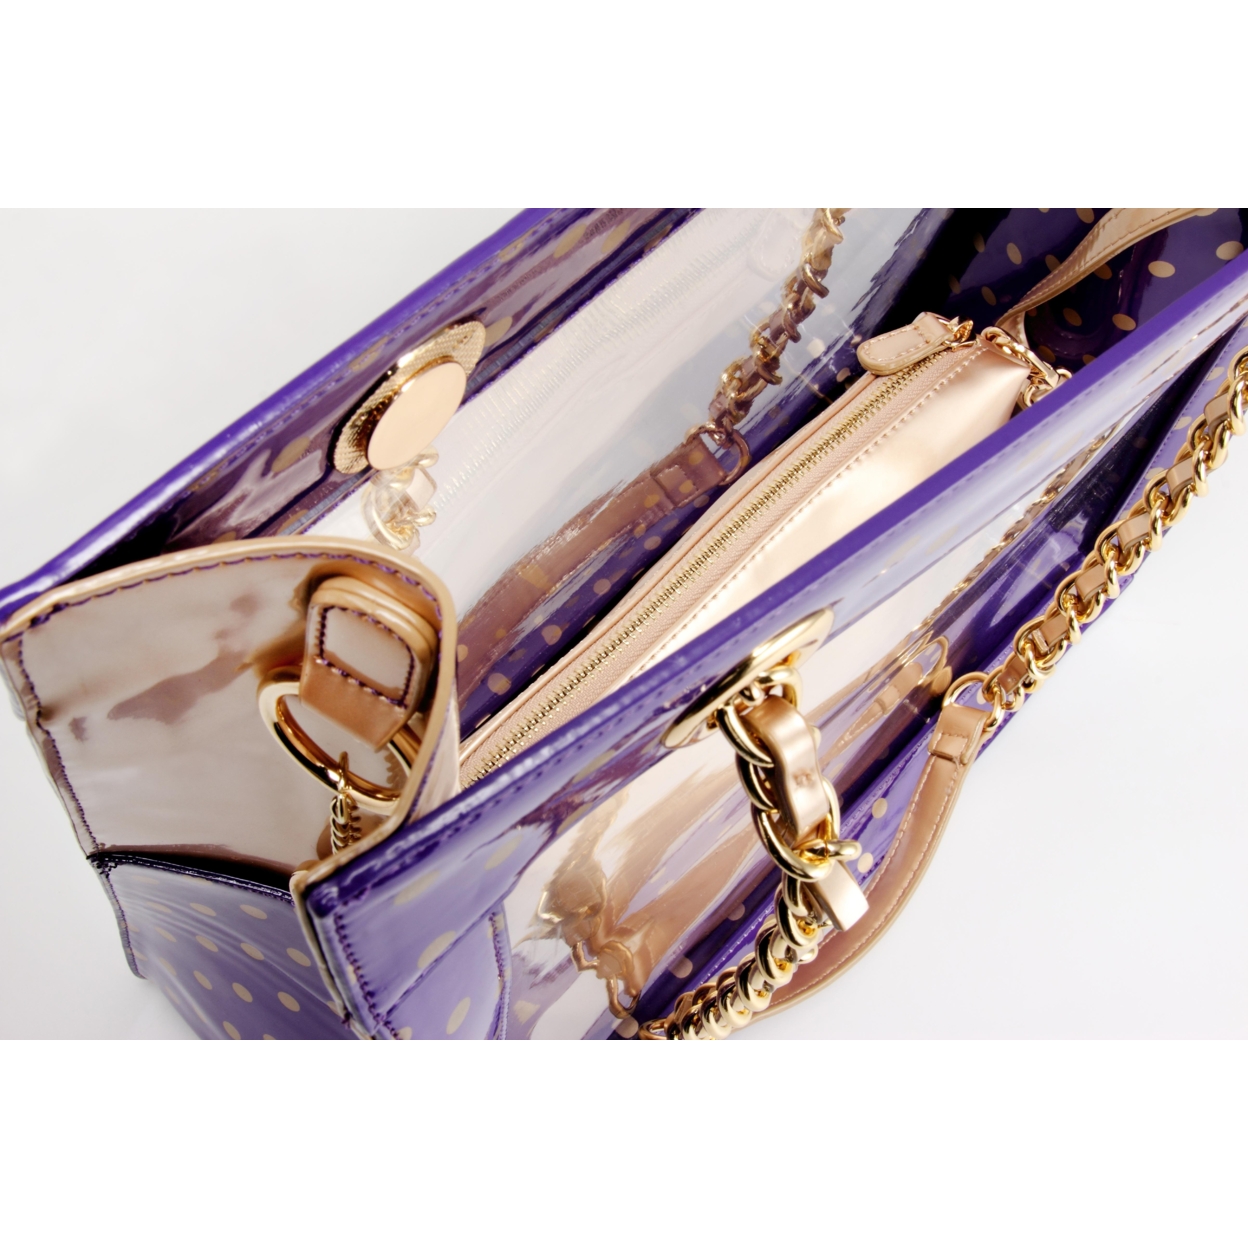 SCORE! Andrea Large Clear Designer Tote For School, Work, Travel - Royal Purple And Gold Gold